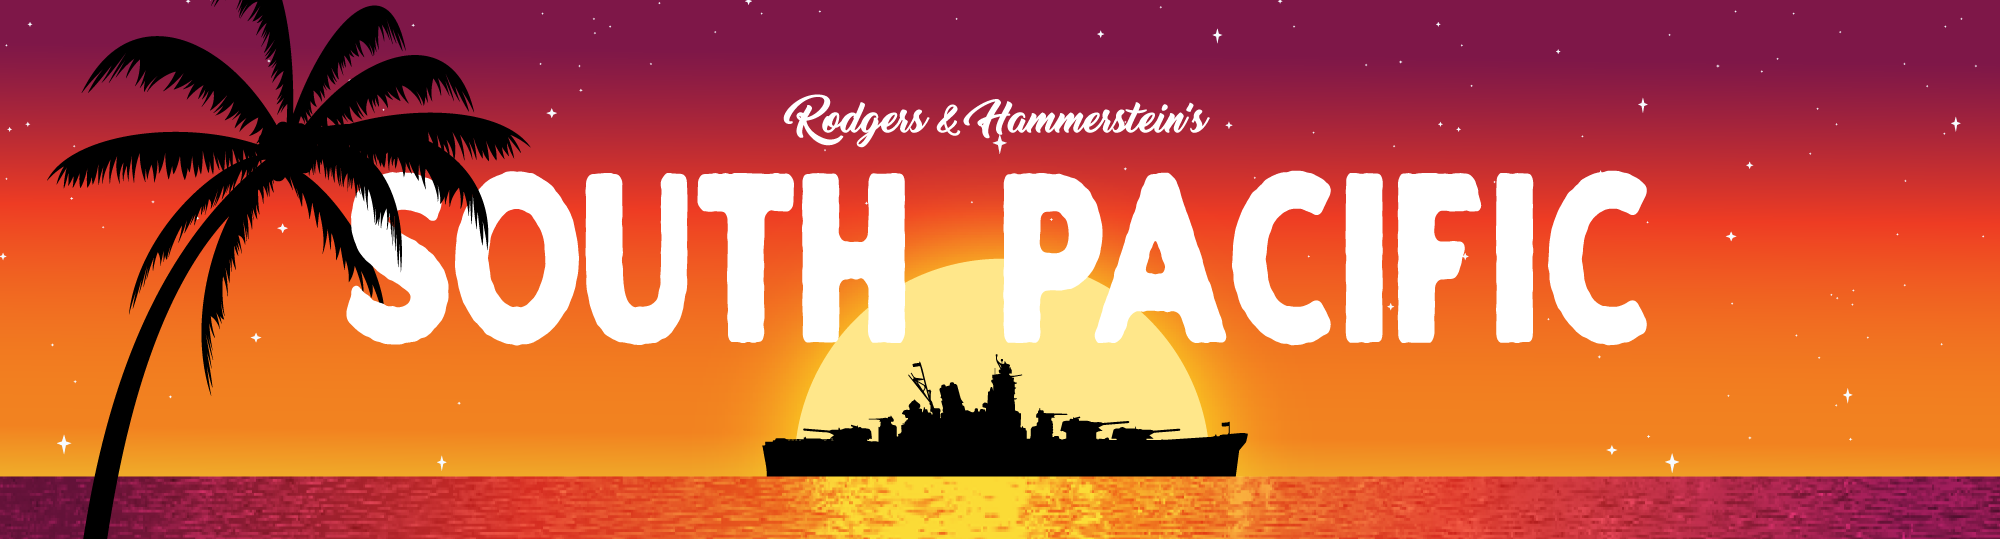 South Pacific banner